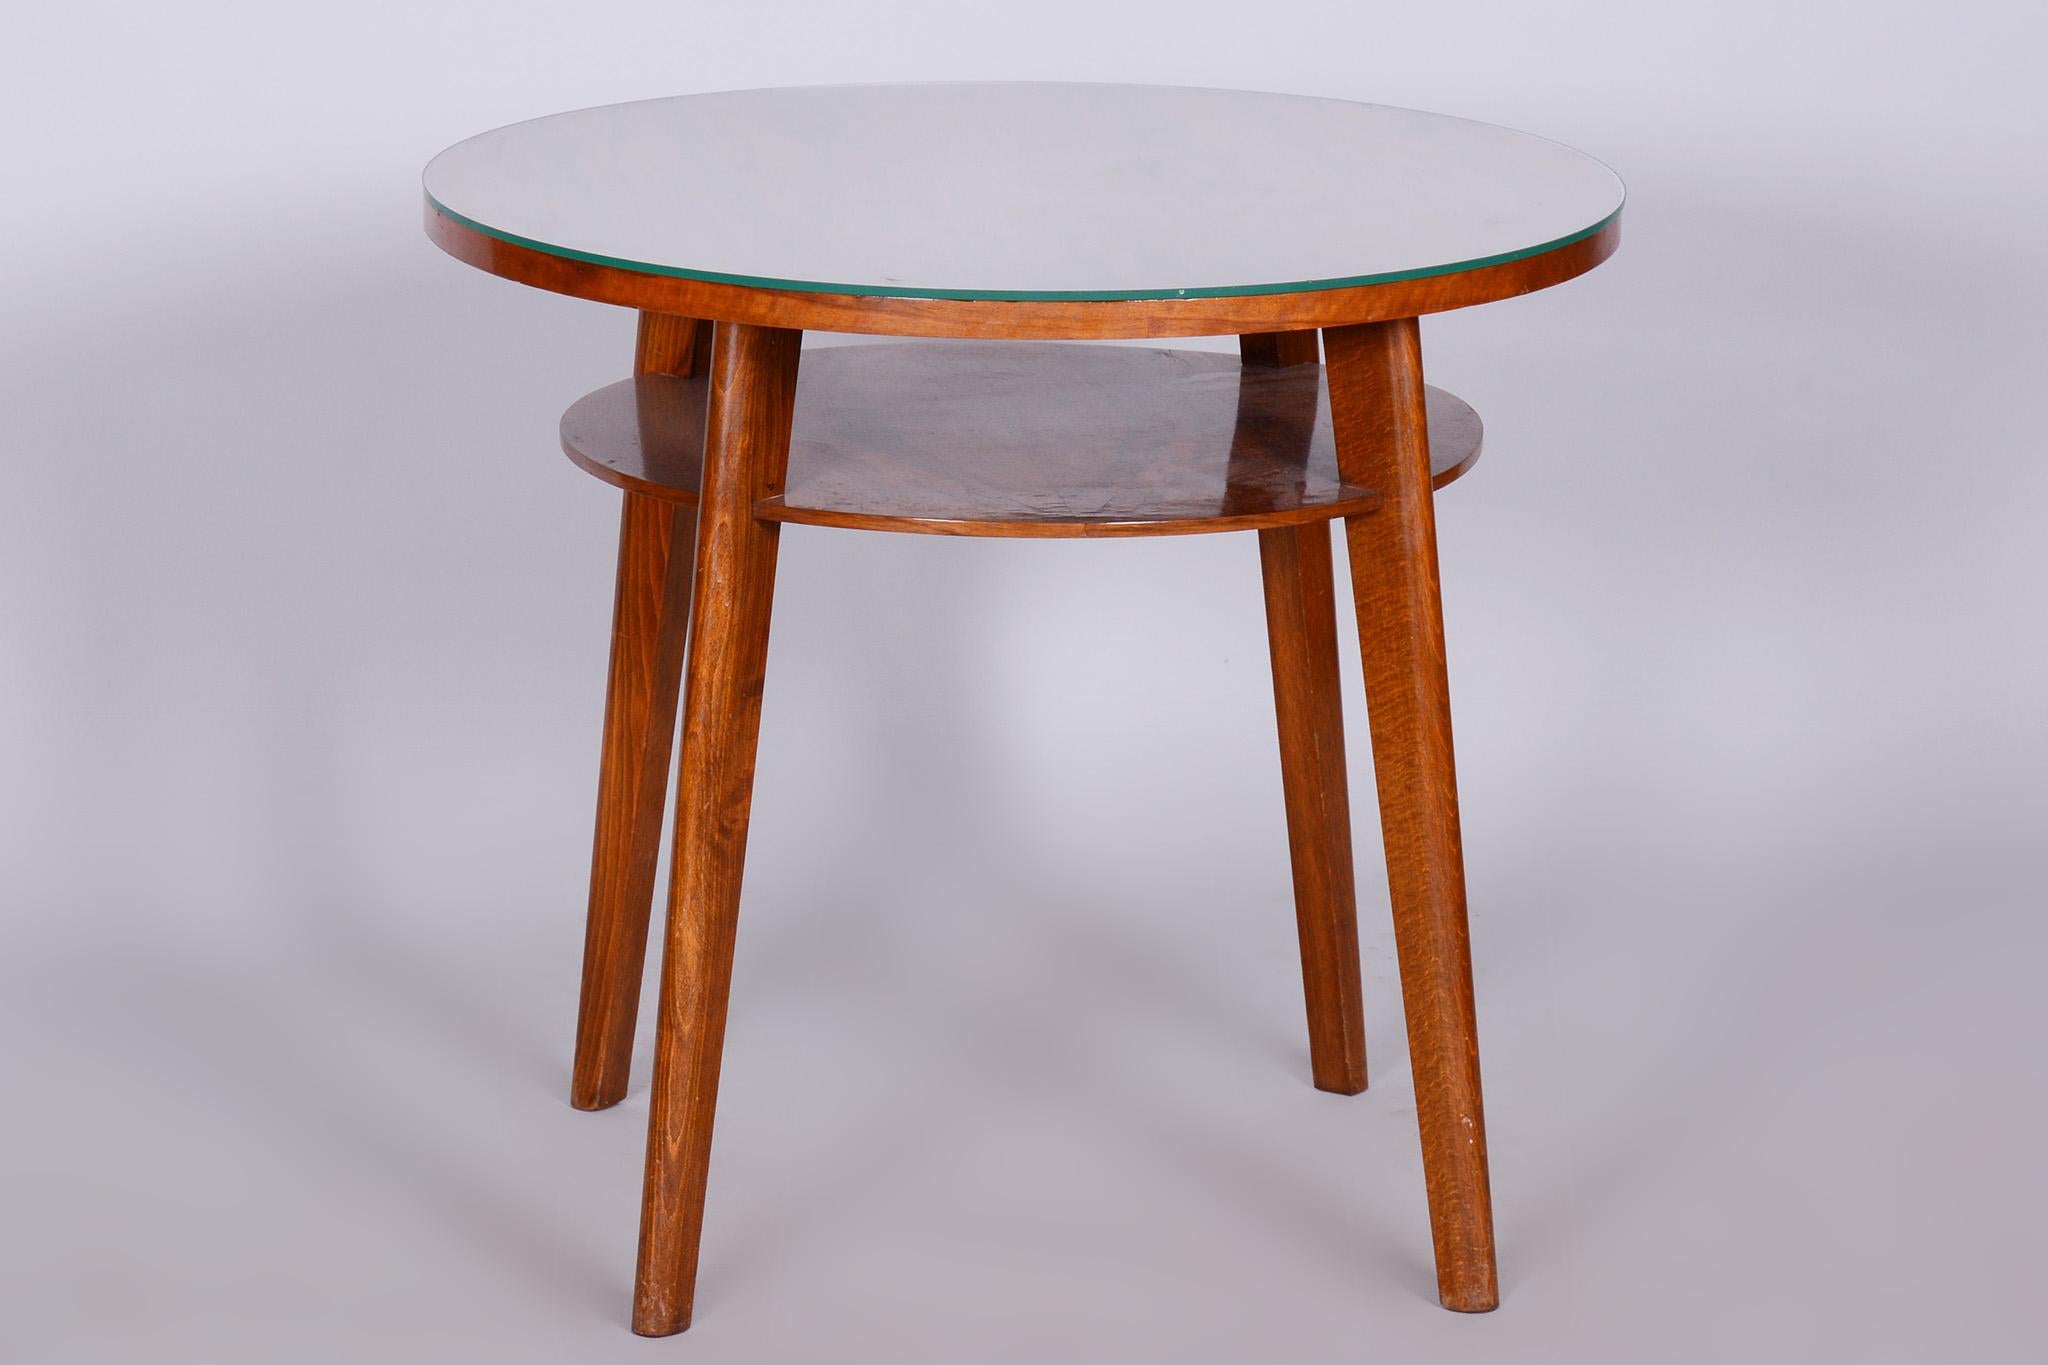 Original midcentury small round table.

Period: 1950-1959
Maker: JITONA Sobeslav
Source: Czechia
Material: beech, walnut, glass

Very well-preserved original condition.
Solid and stable construction.